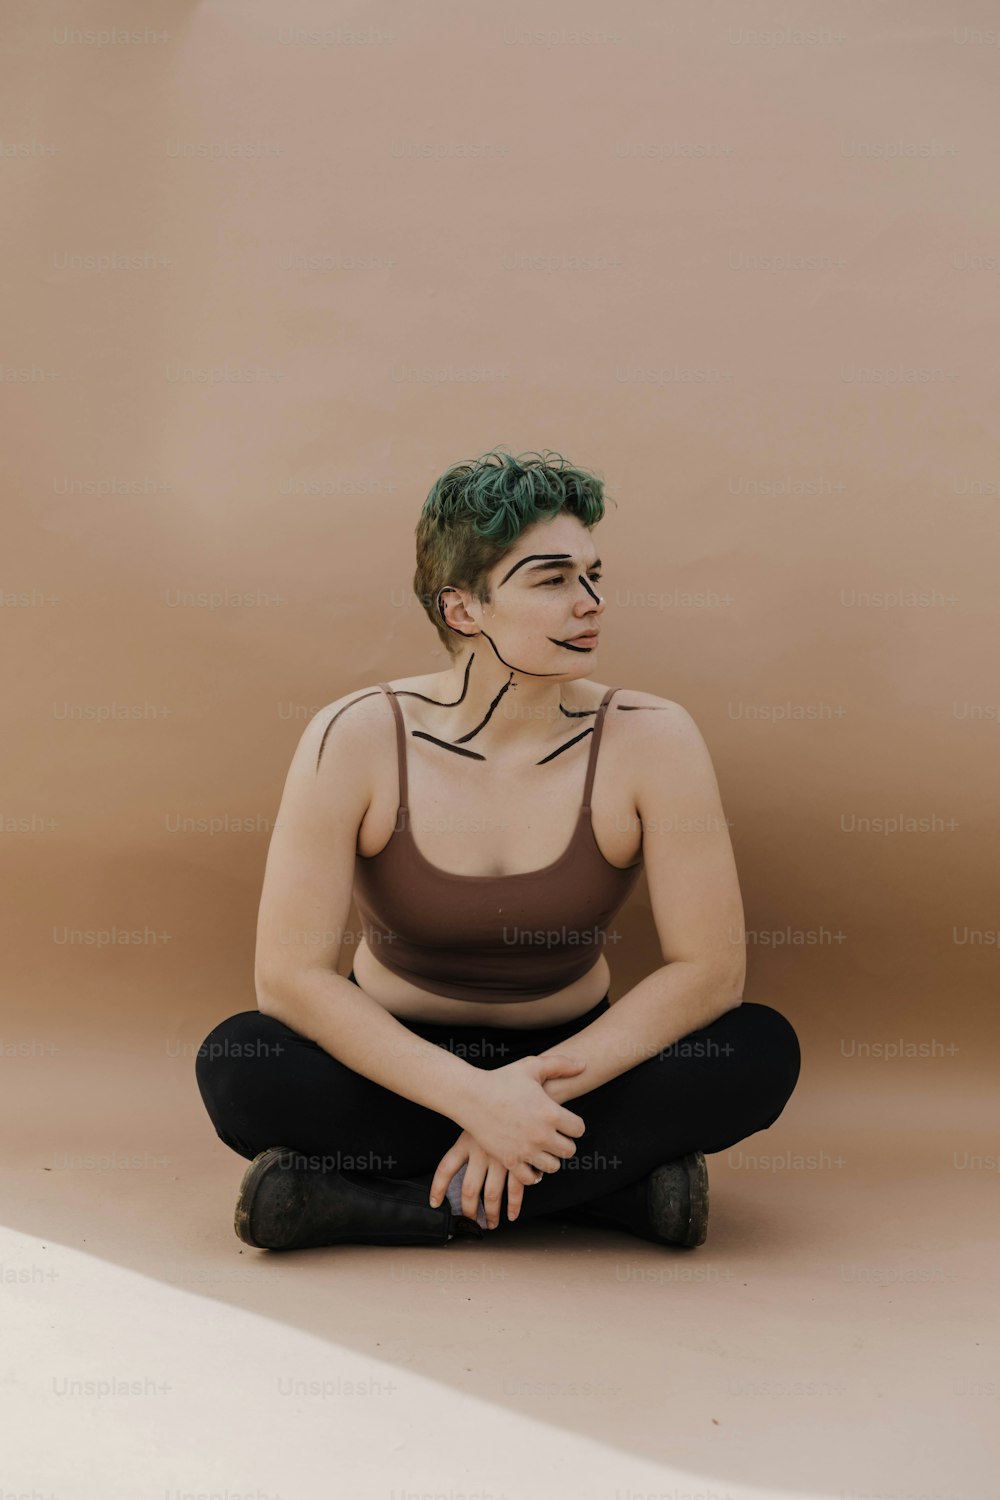 a woman with green hair sitting on the ground